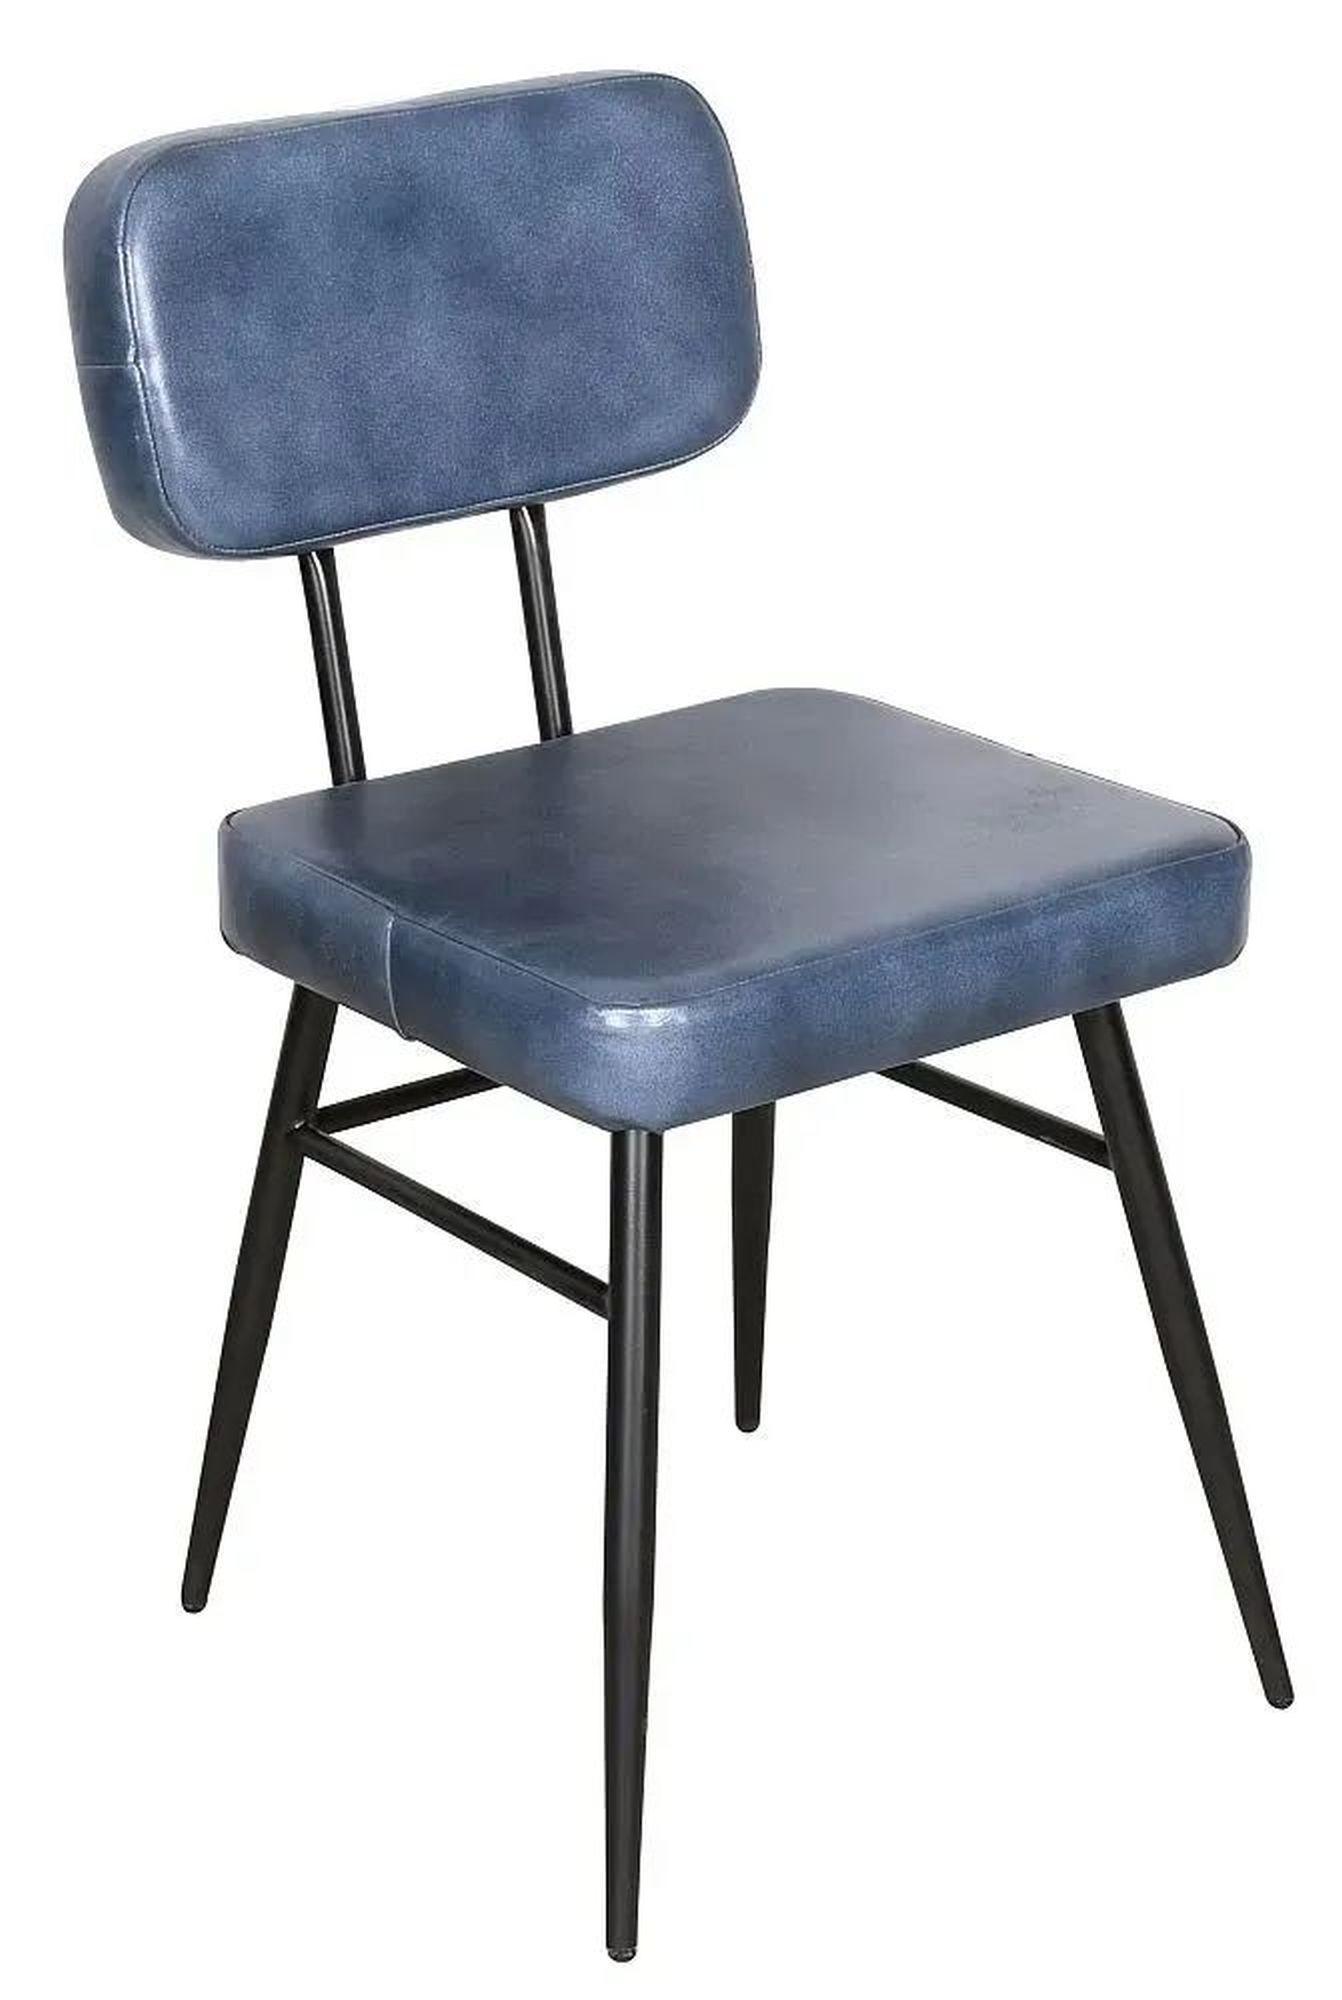 Louise Blue Dining Chair, Genuine Leather with Metal Legs (Sold in Pairs)